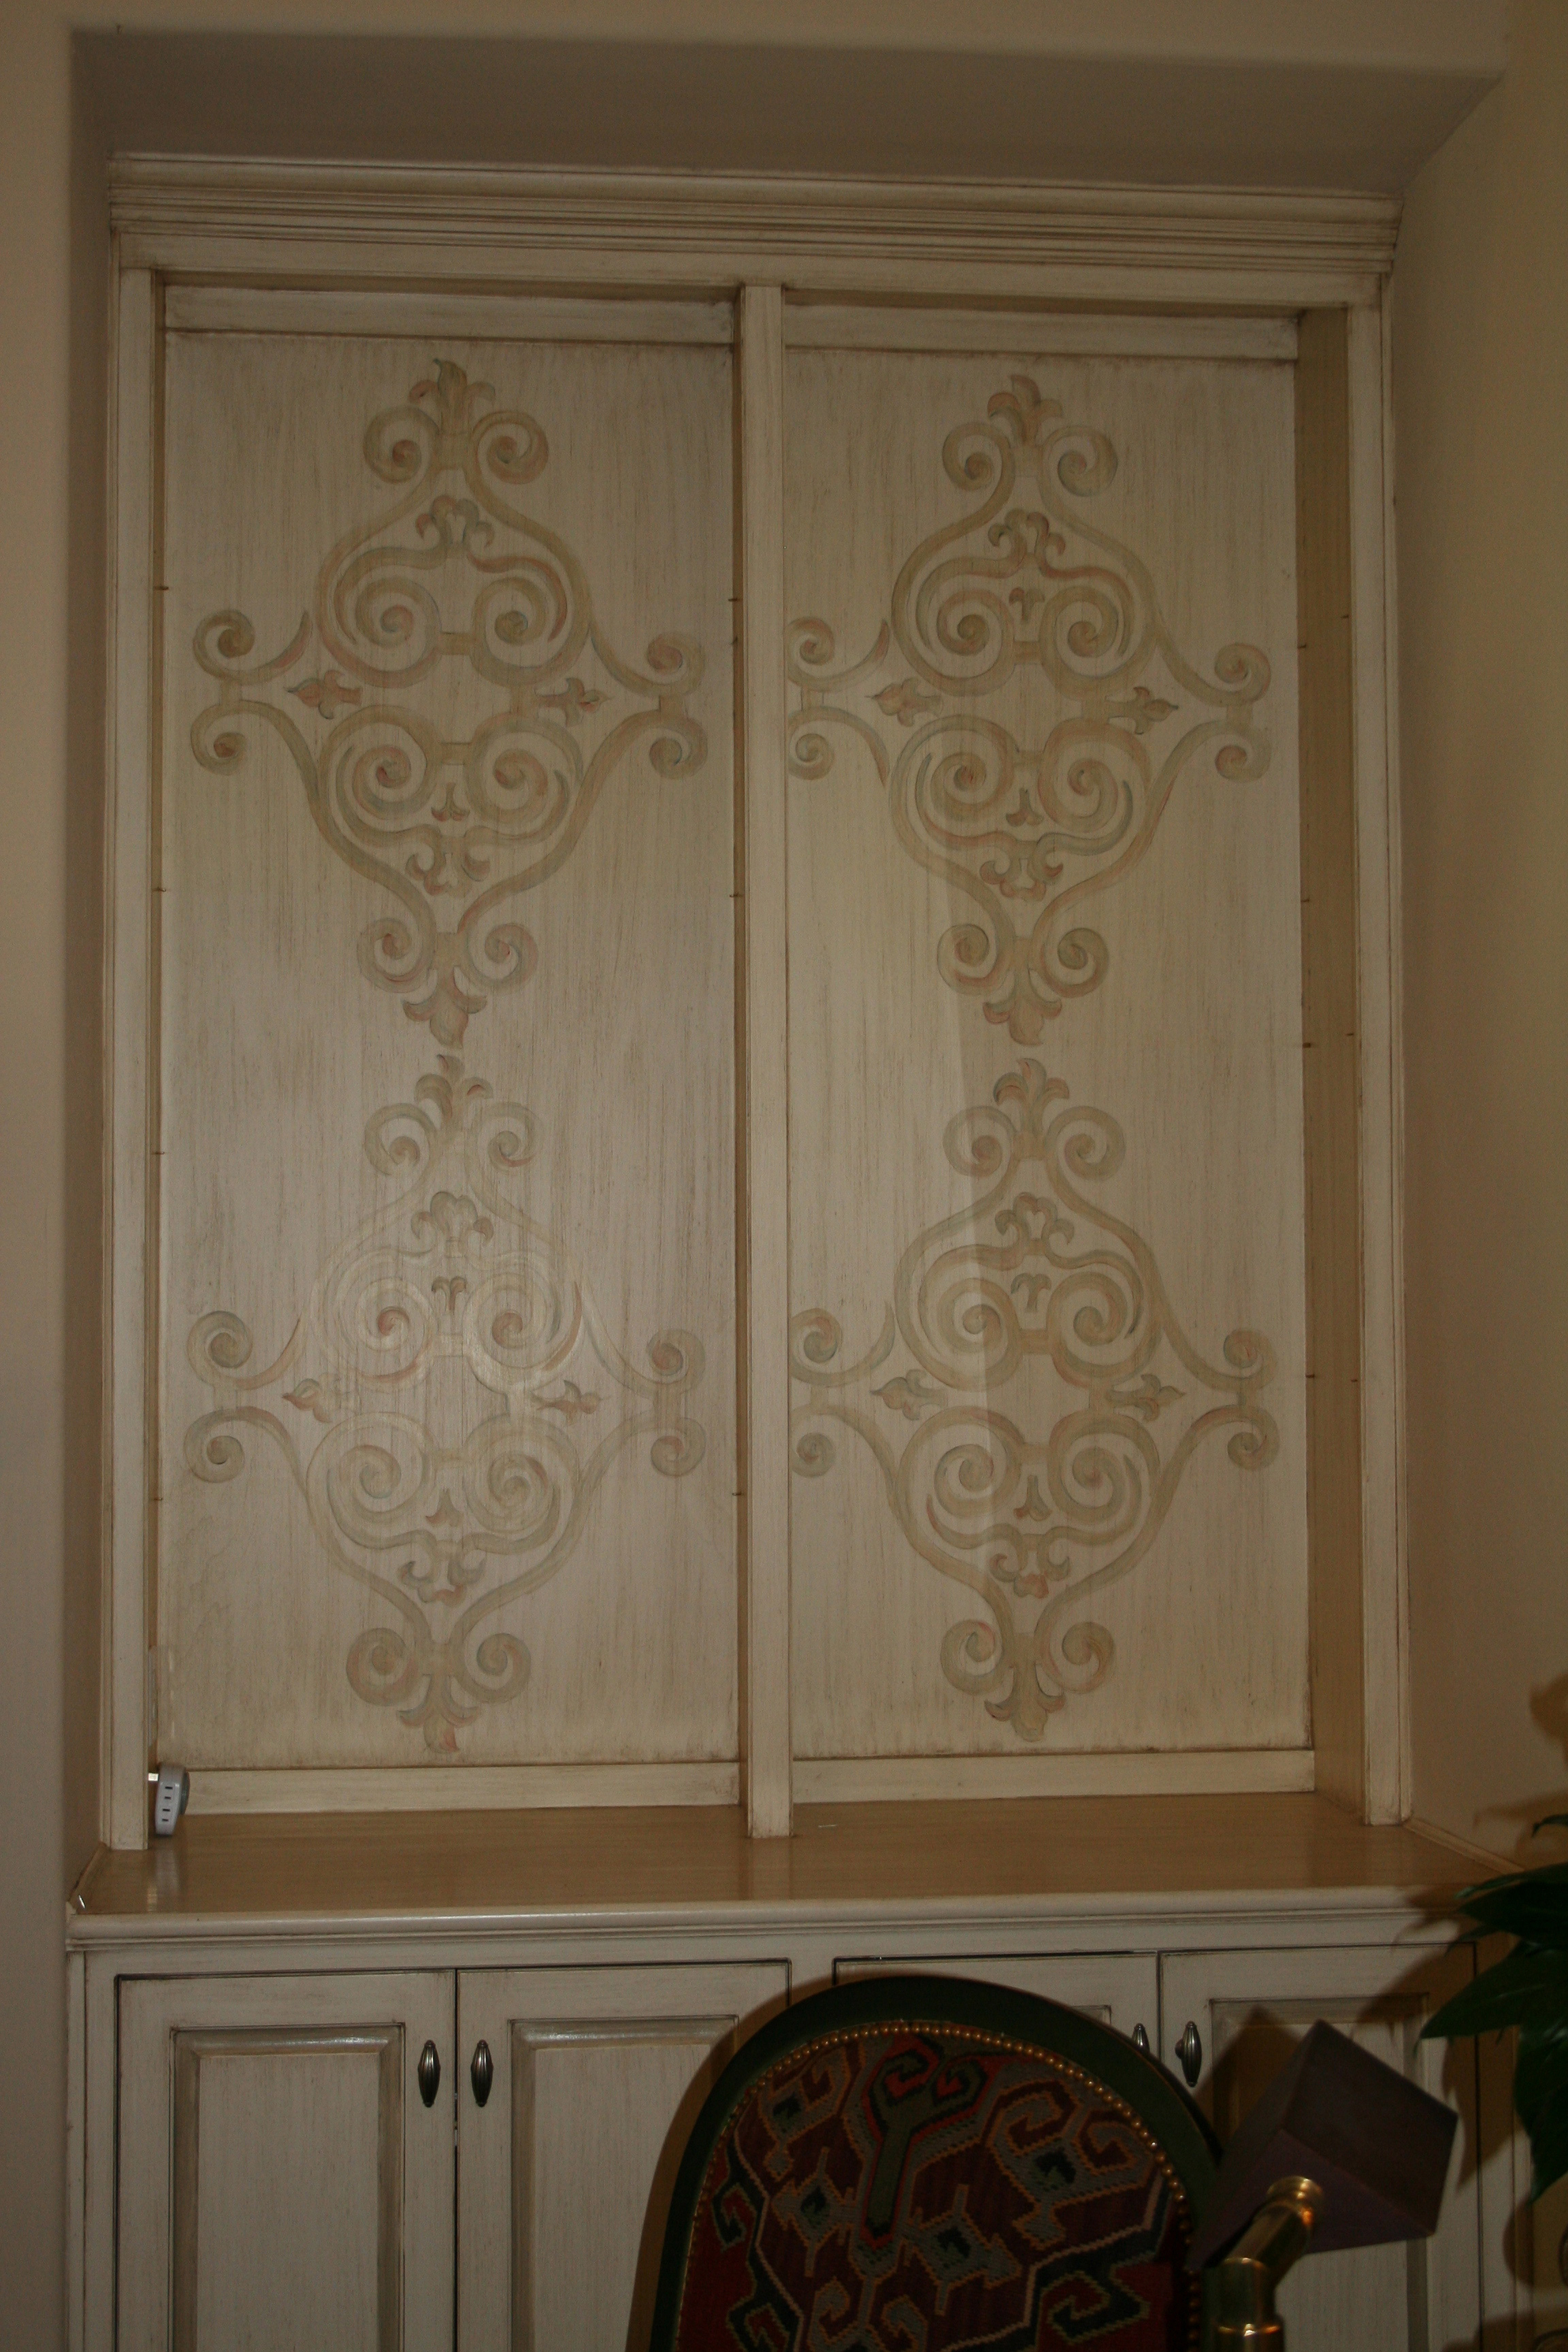  Custom hand painted patterns on cabinet doors 